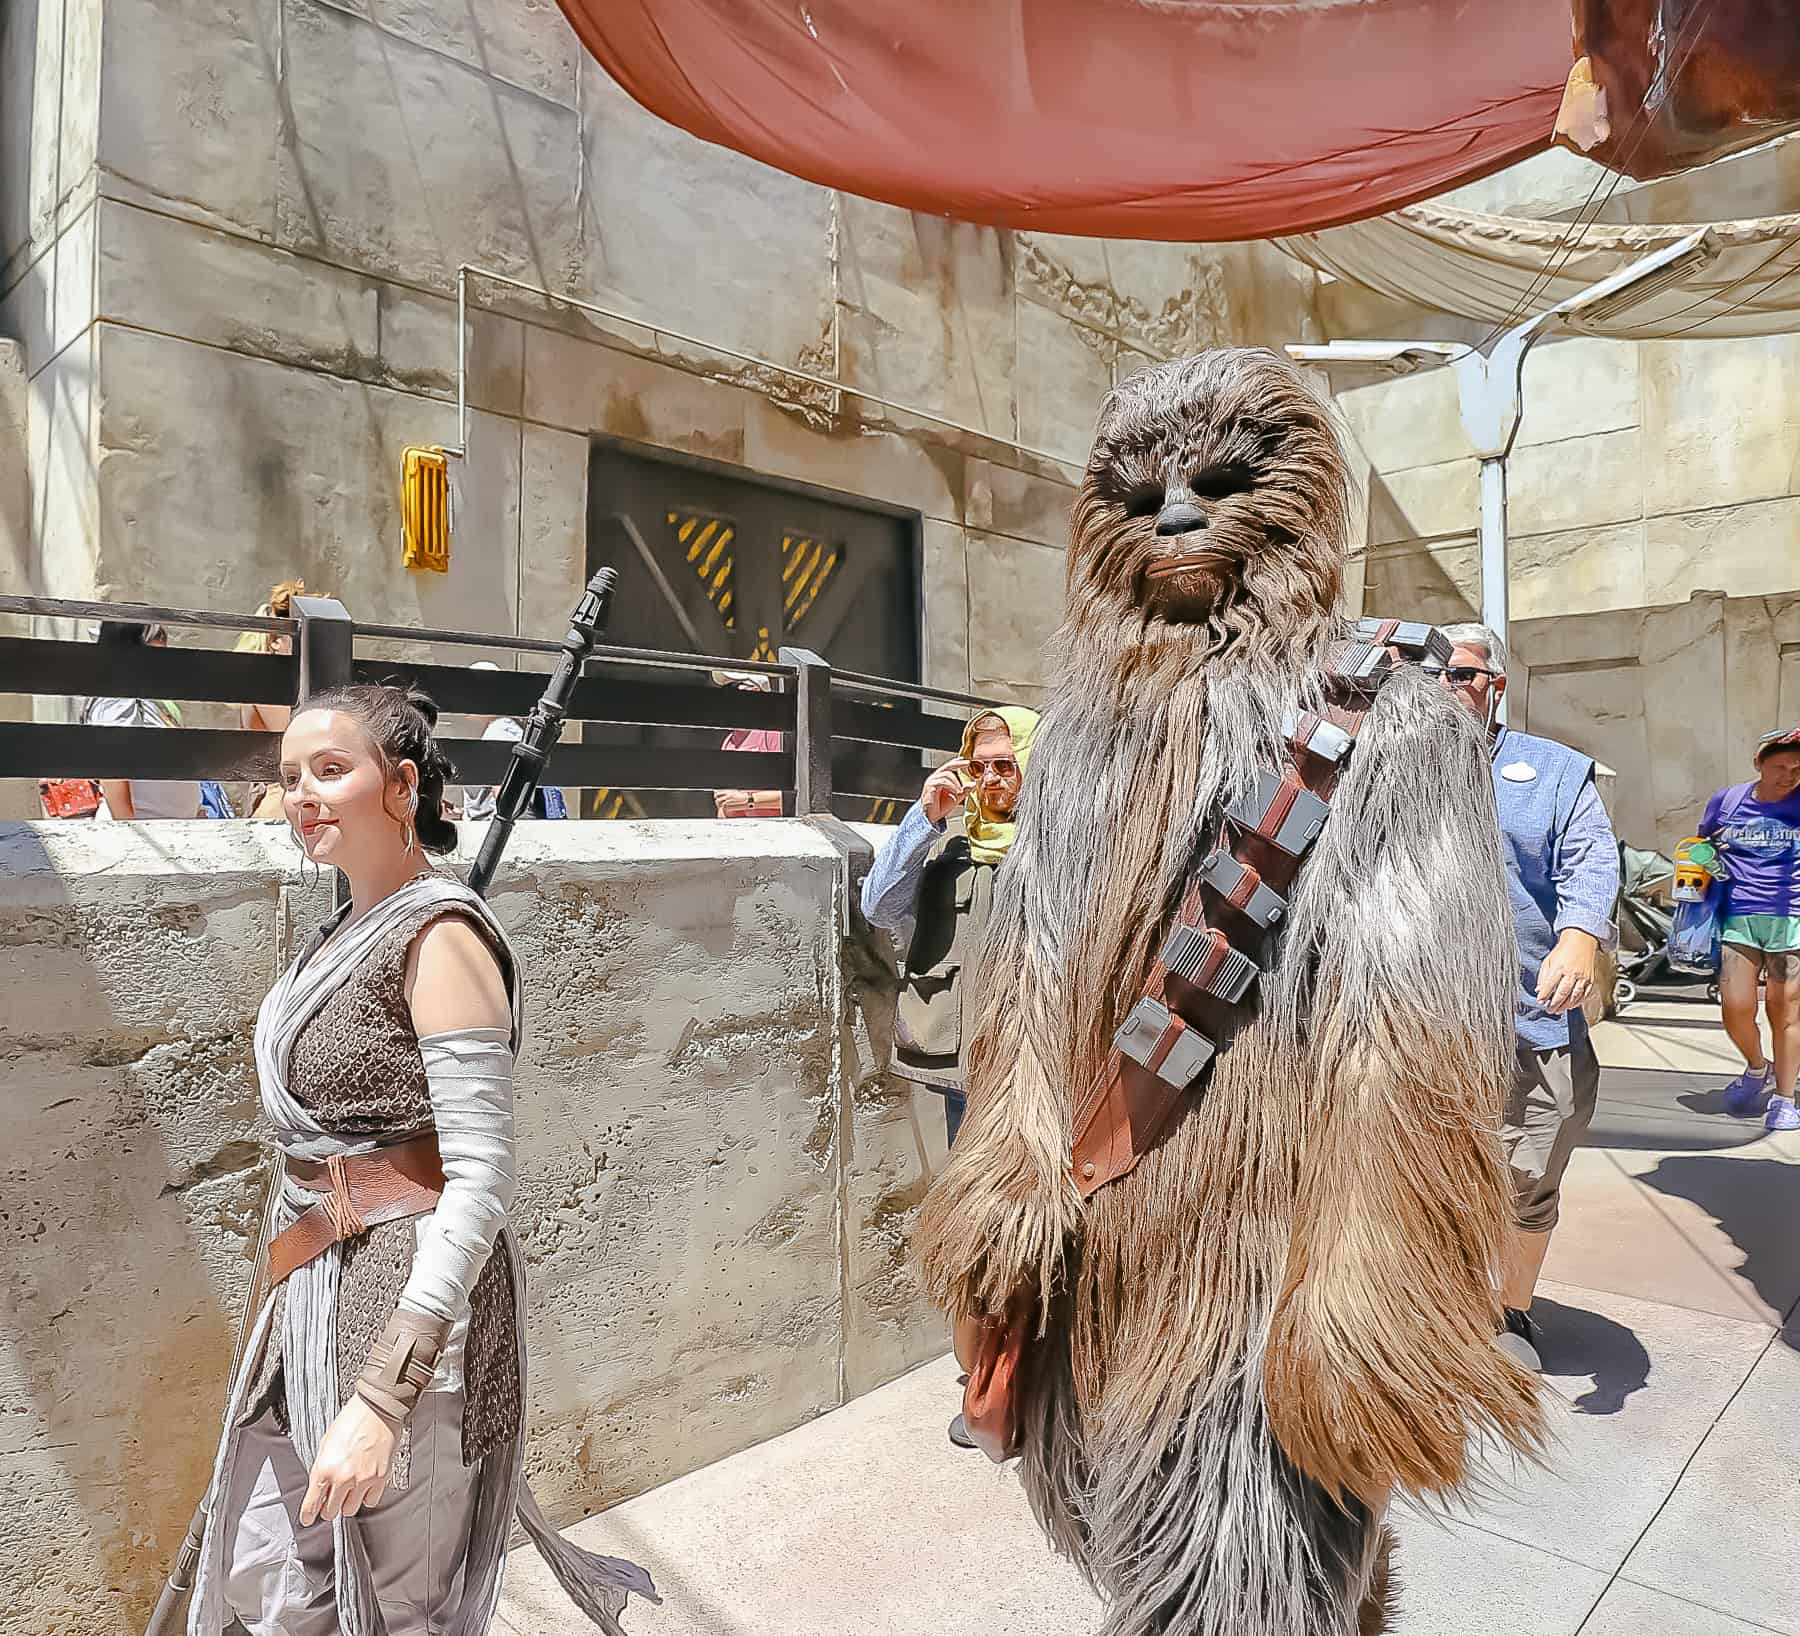 Rey from Star Wars walking through Galaxy's Edge with Chewbacca. 